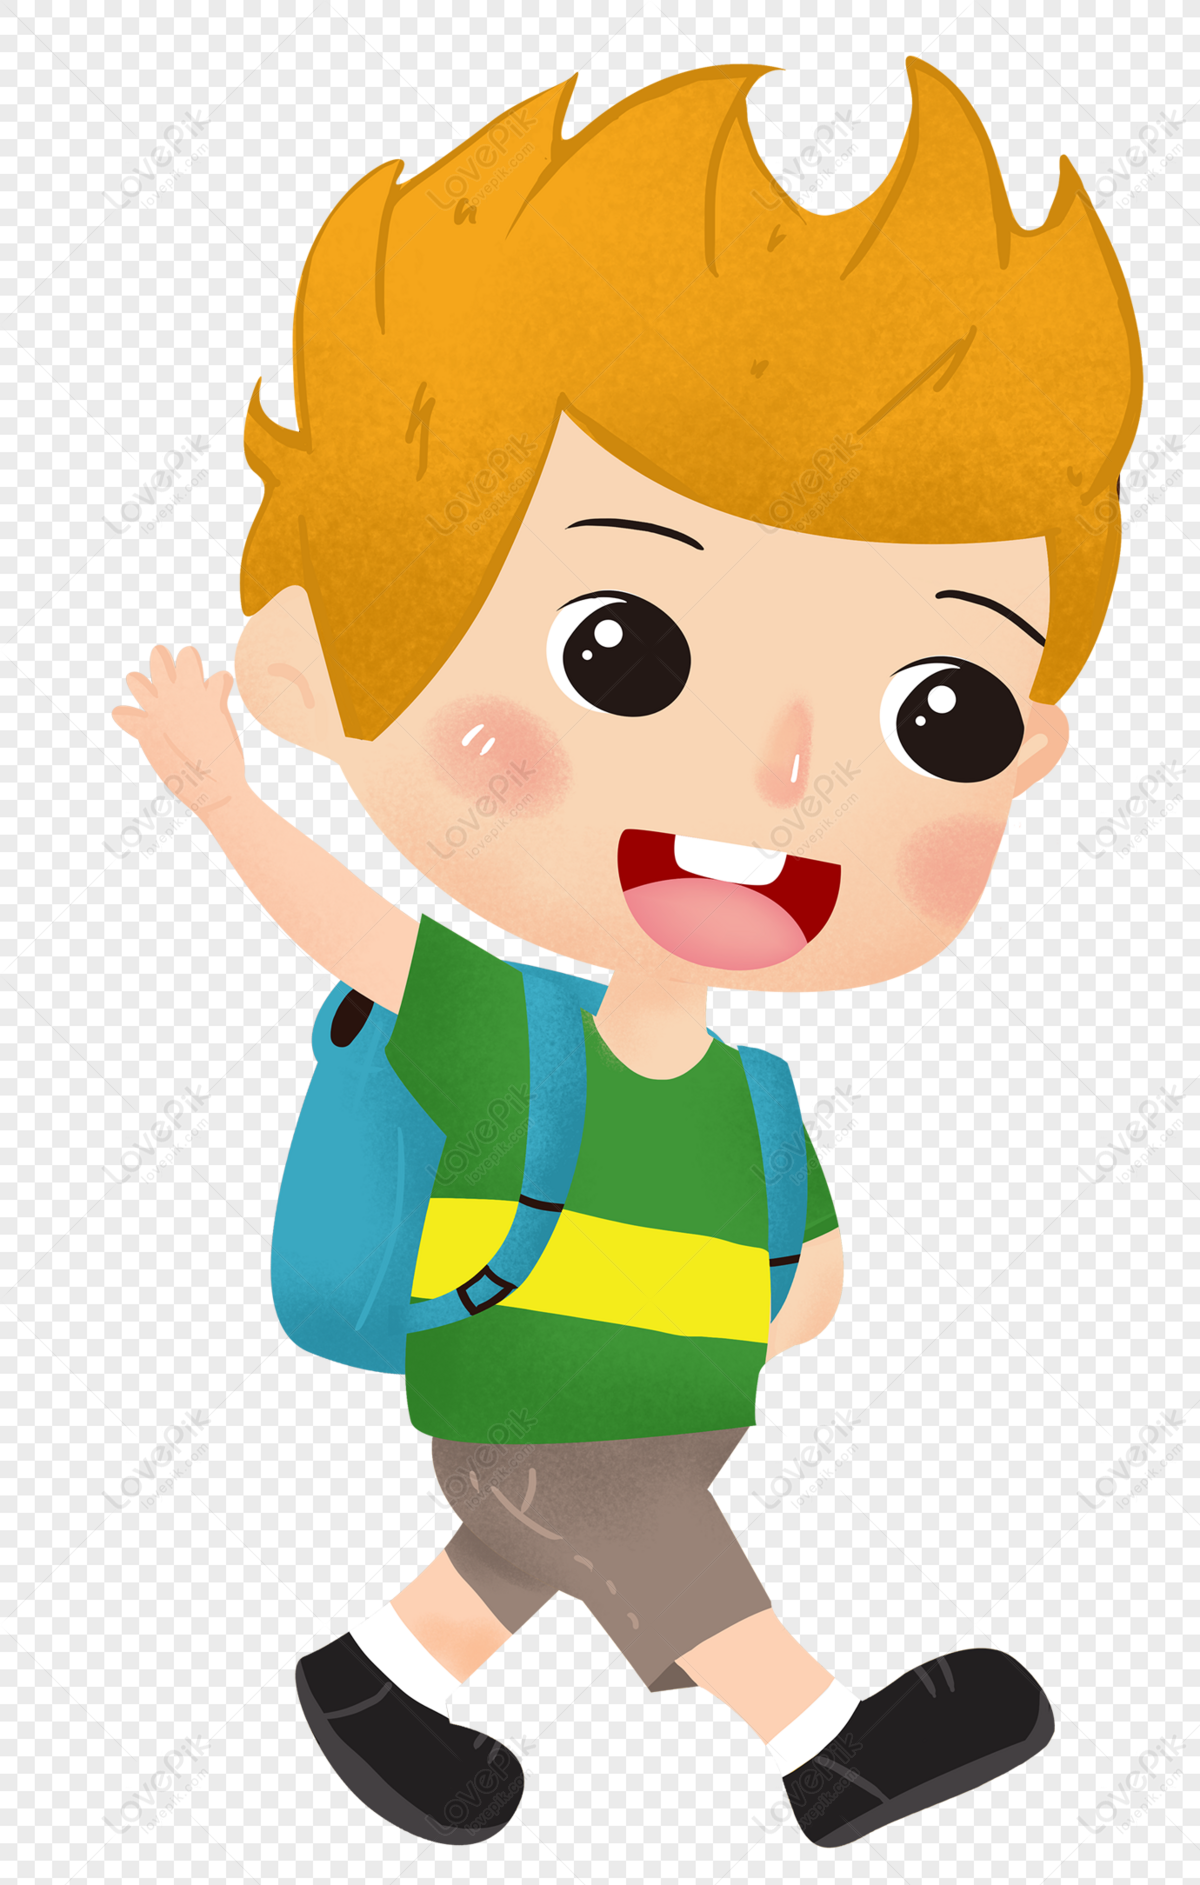 Children In Cartoon Opening Season PNG Picture And Clipart Image For Free  Download - Lovepik | 400415565